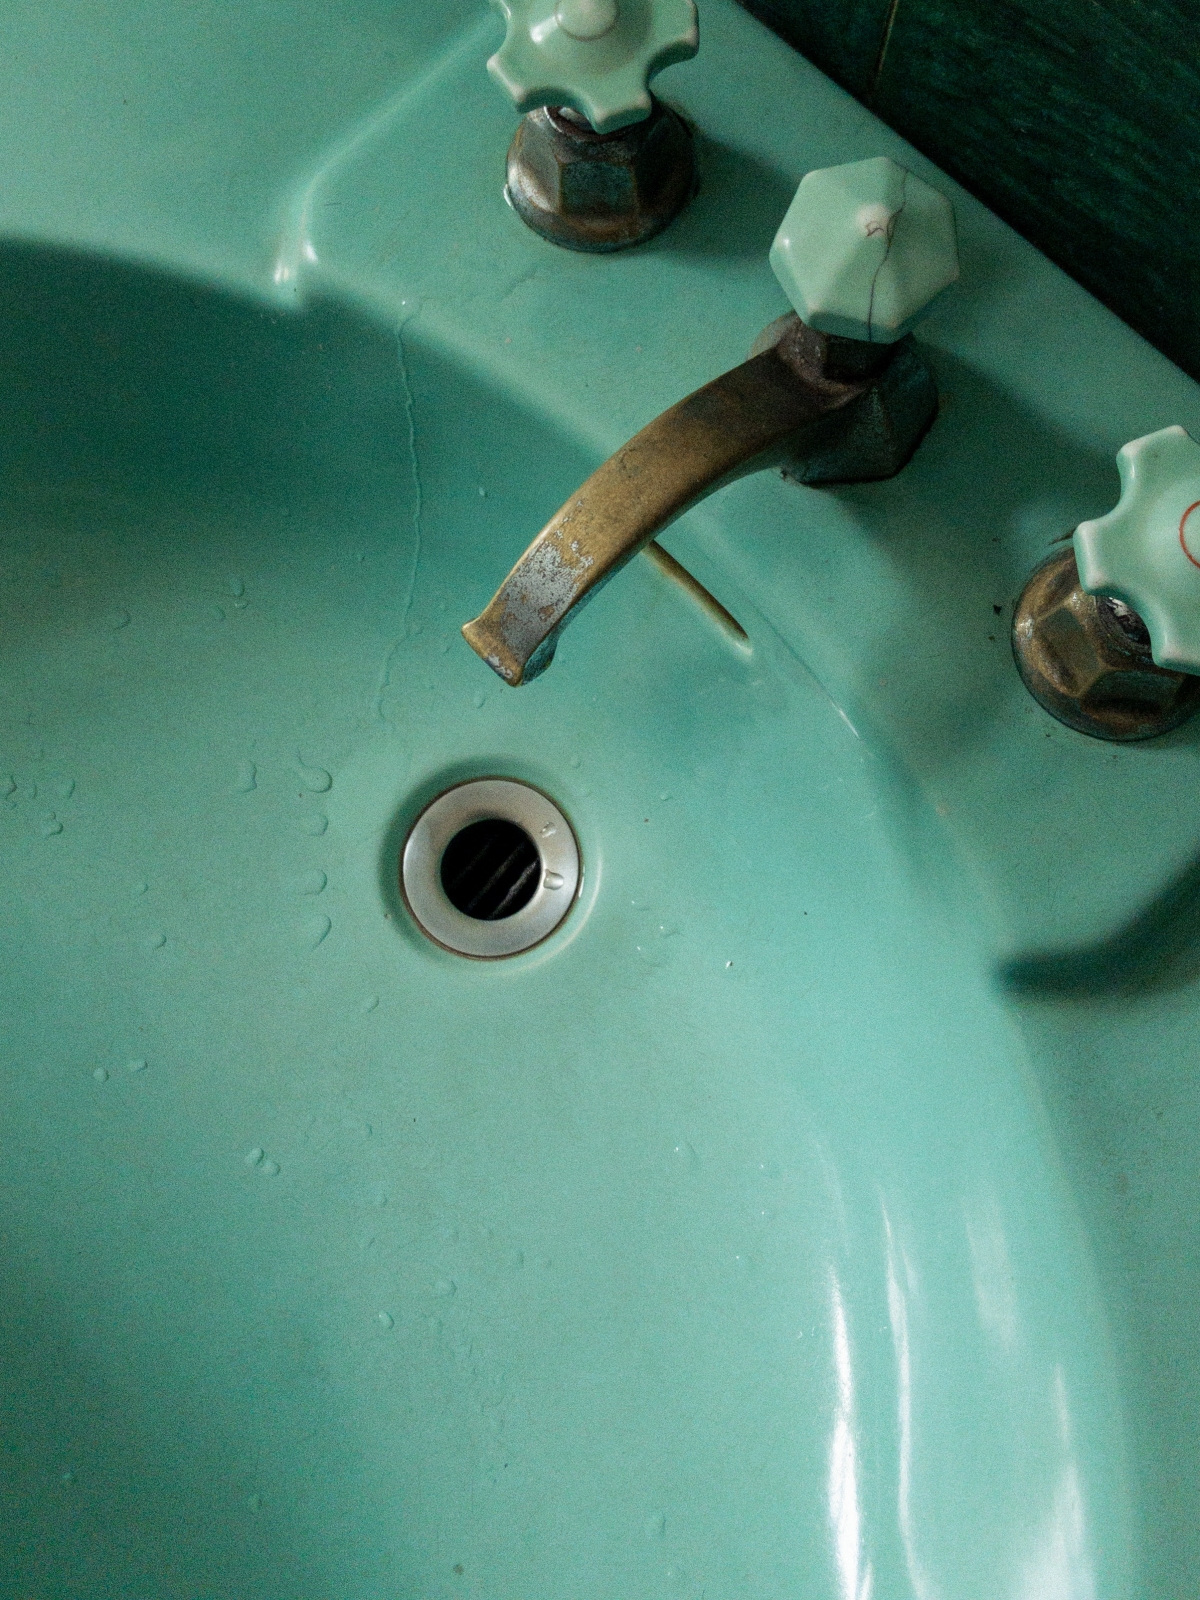 How to Easily Clean Your Sink & Drain to Avoid Unpleasant Odors